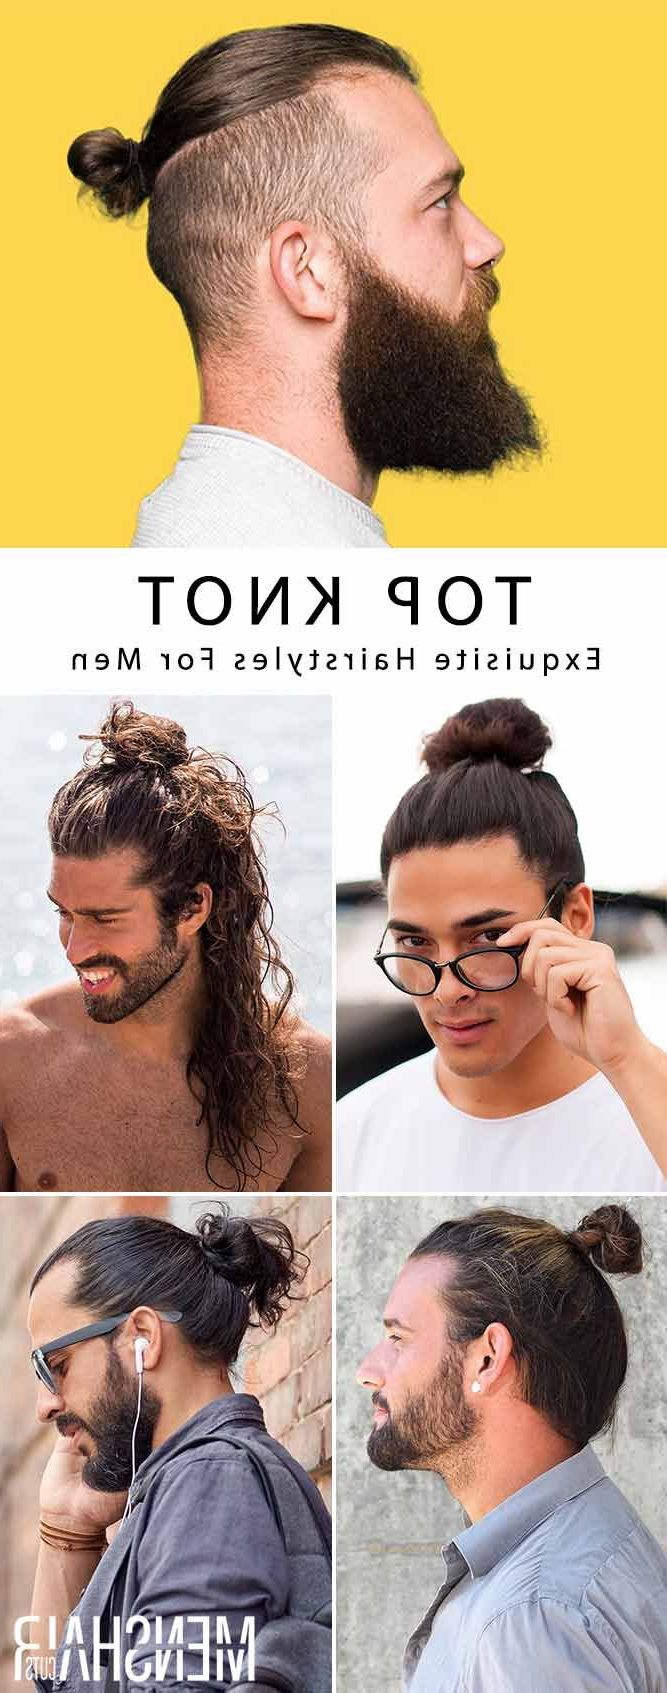 All About Top Knot Hairstyles For Men And 30+ Exquisite Ways To Rock Them |  Top Knot Hairstyles, Man Bun Hairstyles, Long Hair Styles Men With Most Recent Outstanding Knotted Hairstyles (View 18 of 25)